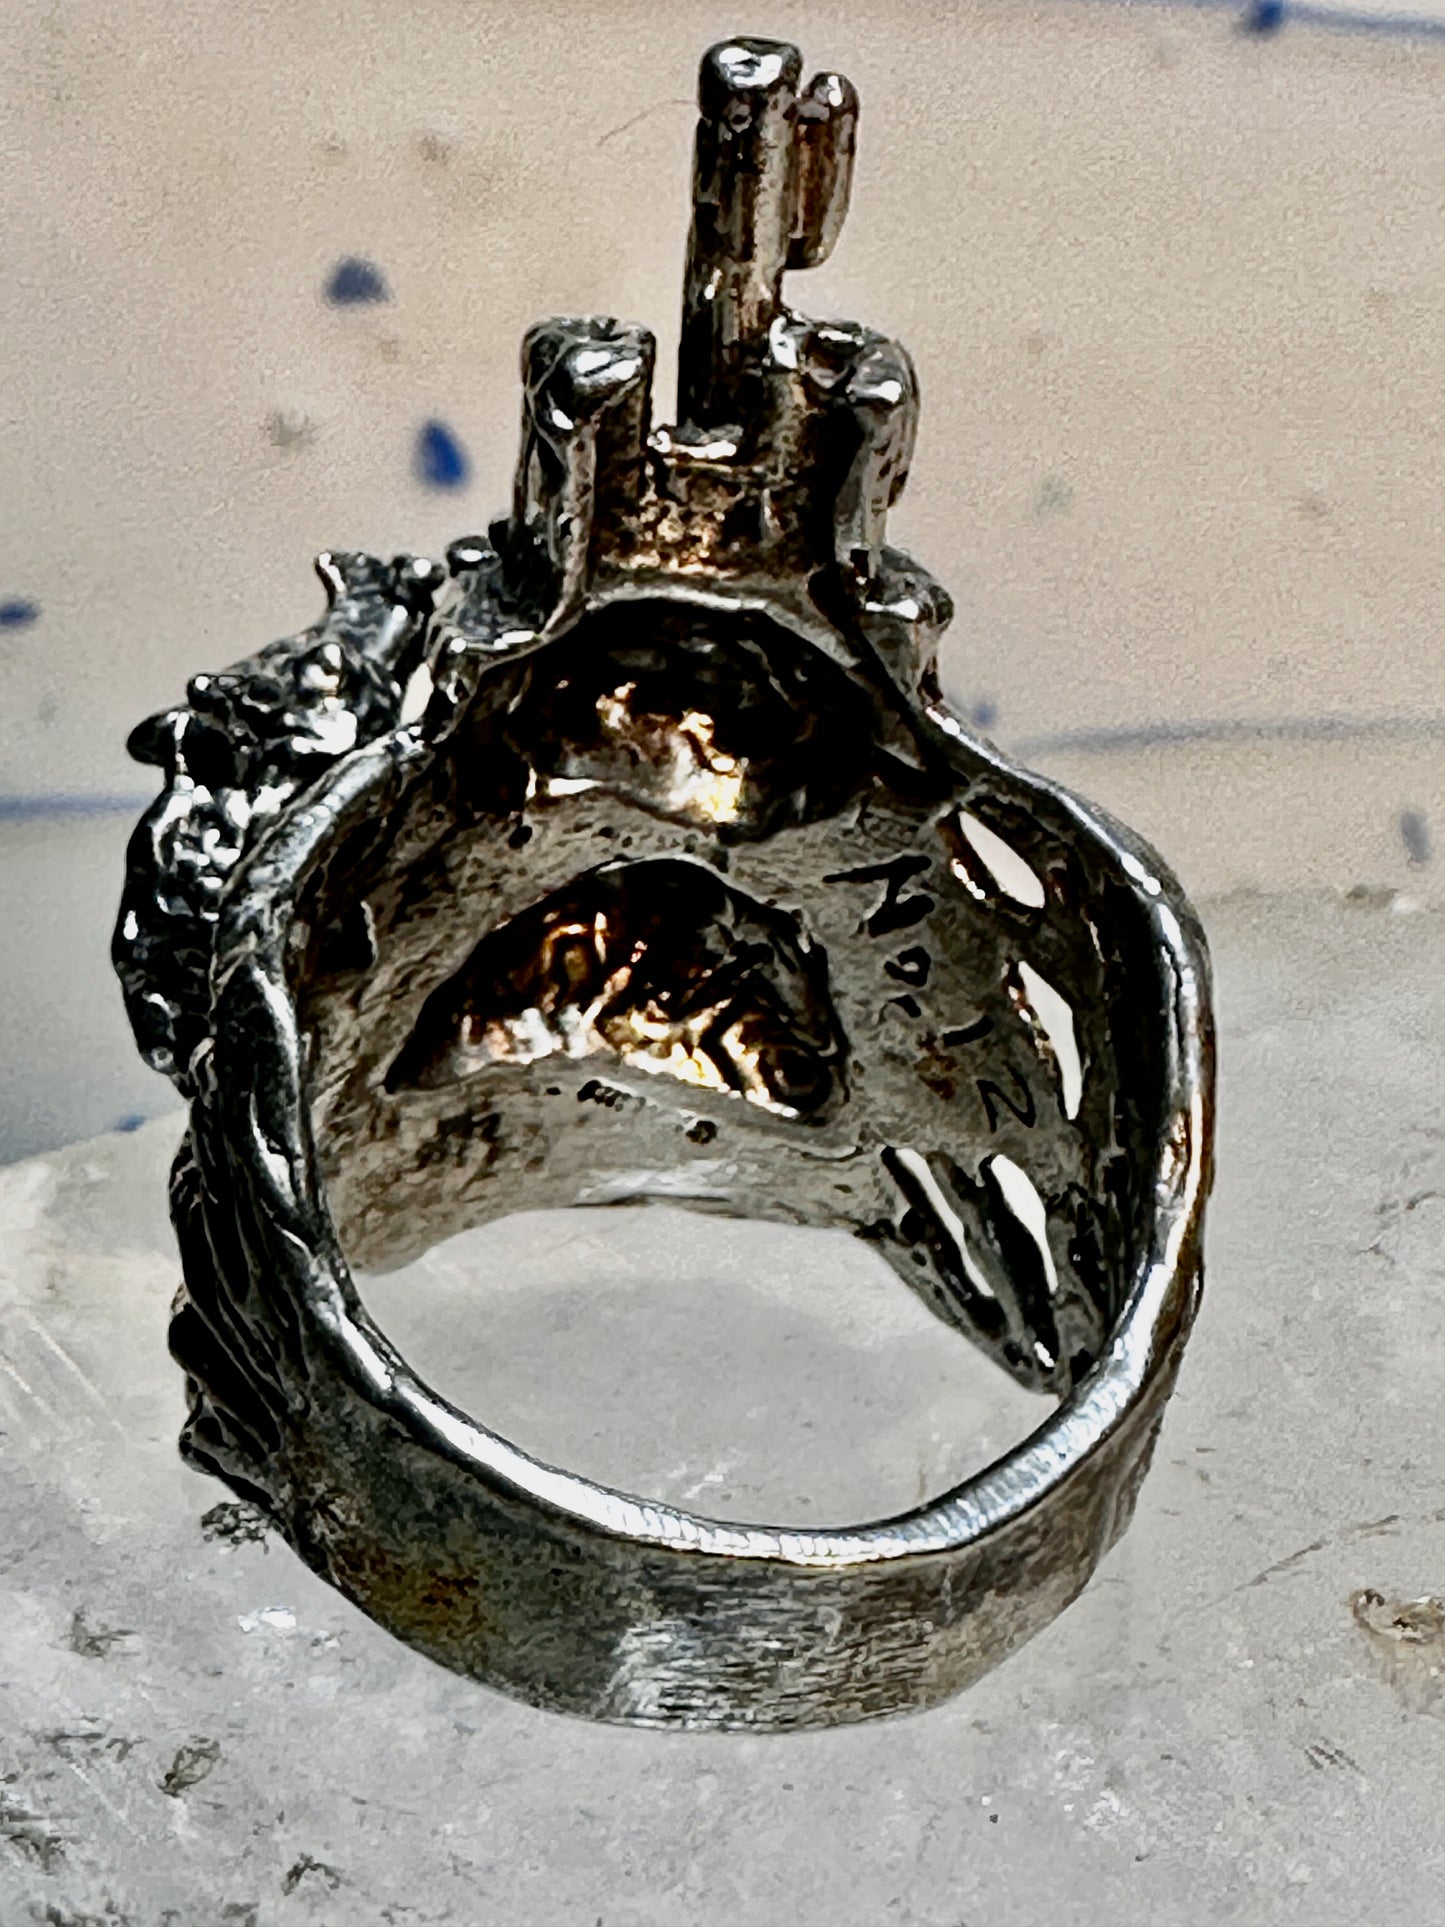 Castle ring dragon Medieval Renaissance band size 8.75 sterling silver women